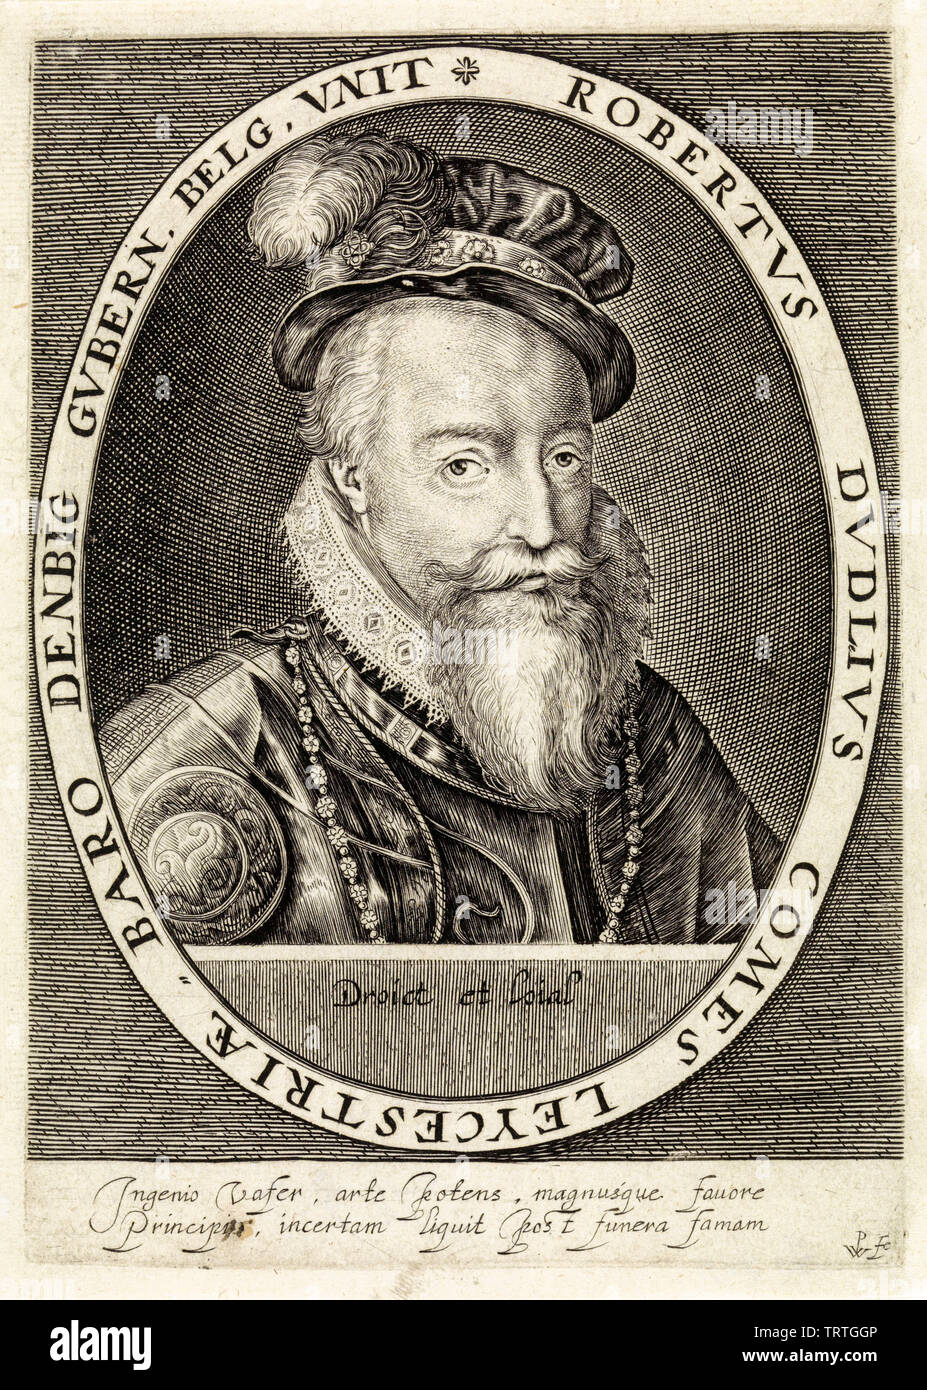 Robert Dudley, Earl of Leicester, 1532-1588, portrait engraving, 1620 Stock Photo